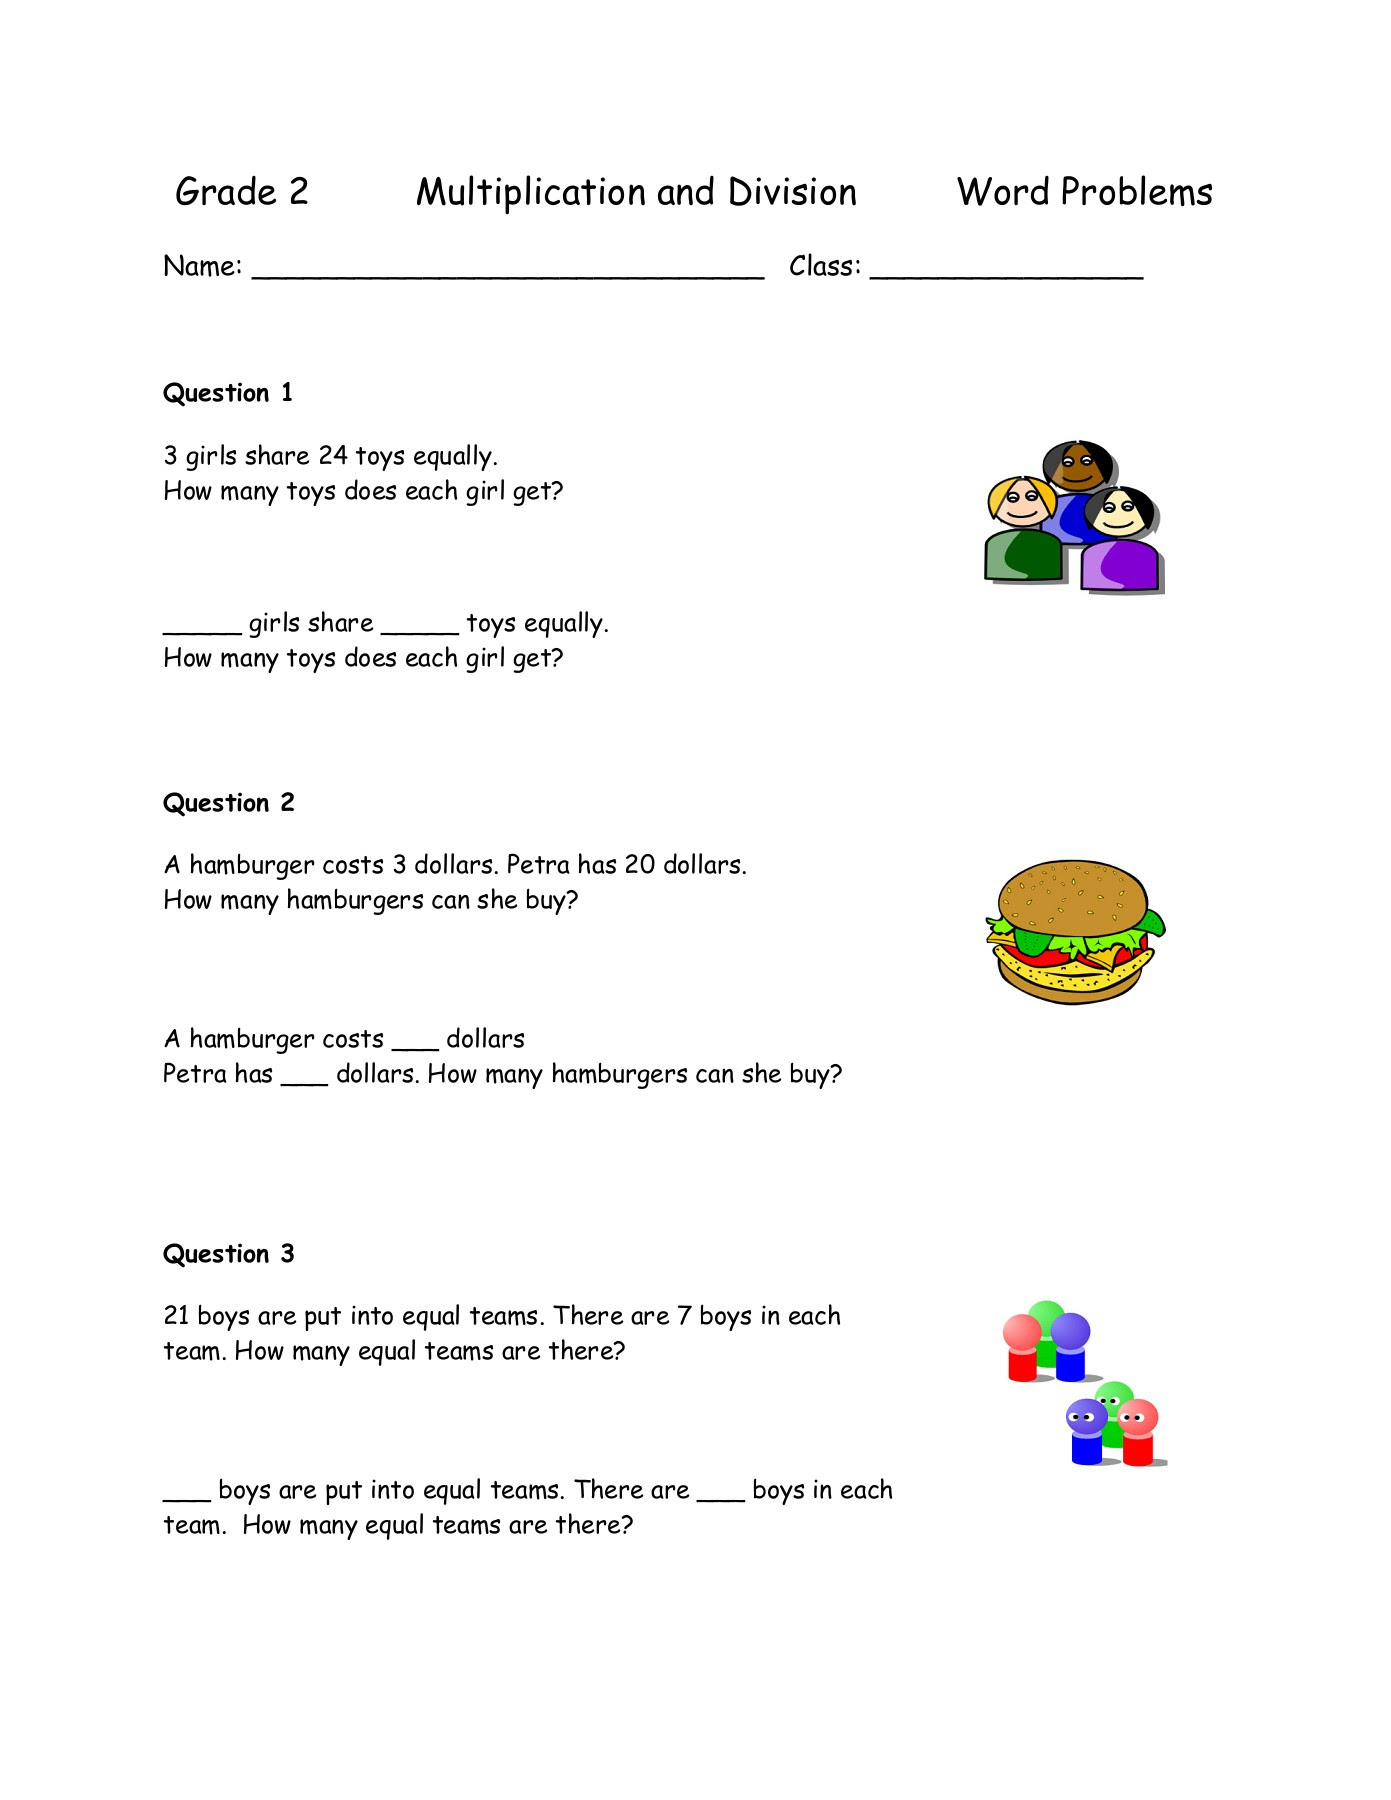 multiplication-and-division-word-problems-grade-2-3rd-grade-two-step